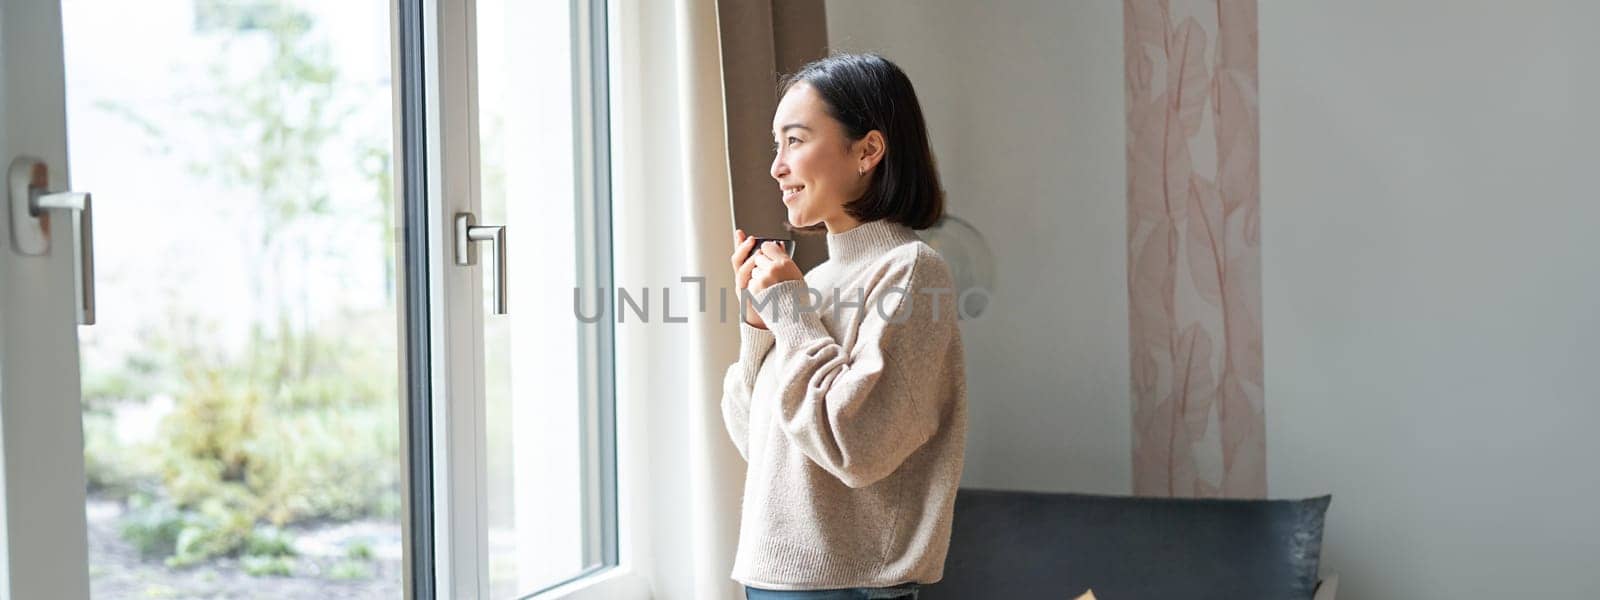 Beautiful korean woman staying at home, looking outside window, drinking coffee espresso and smiling, feeling comfort and warmth.